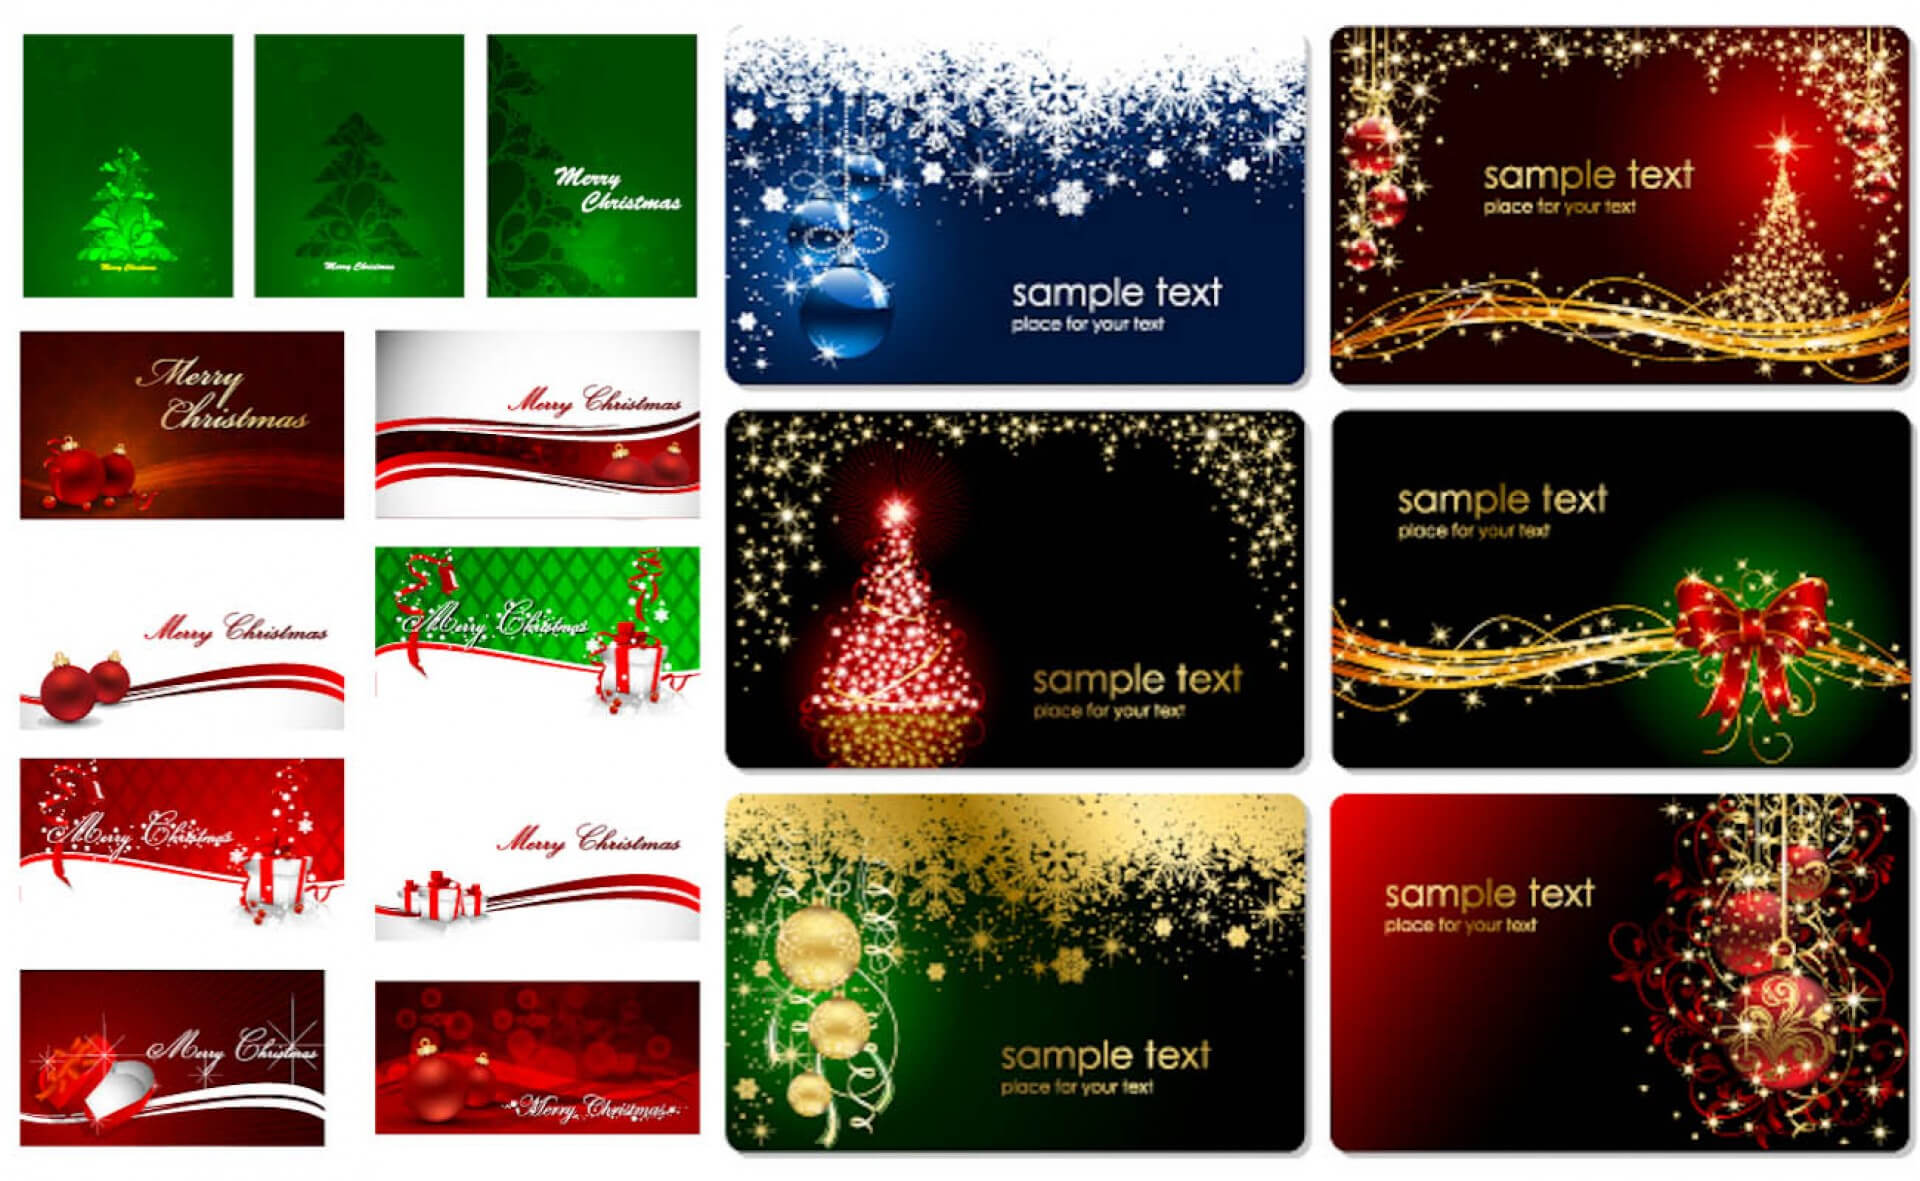 Formidable Photoshop Christmas Cards Templates Template Regarding Free Christmas Card Templates For Photoshop